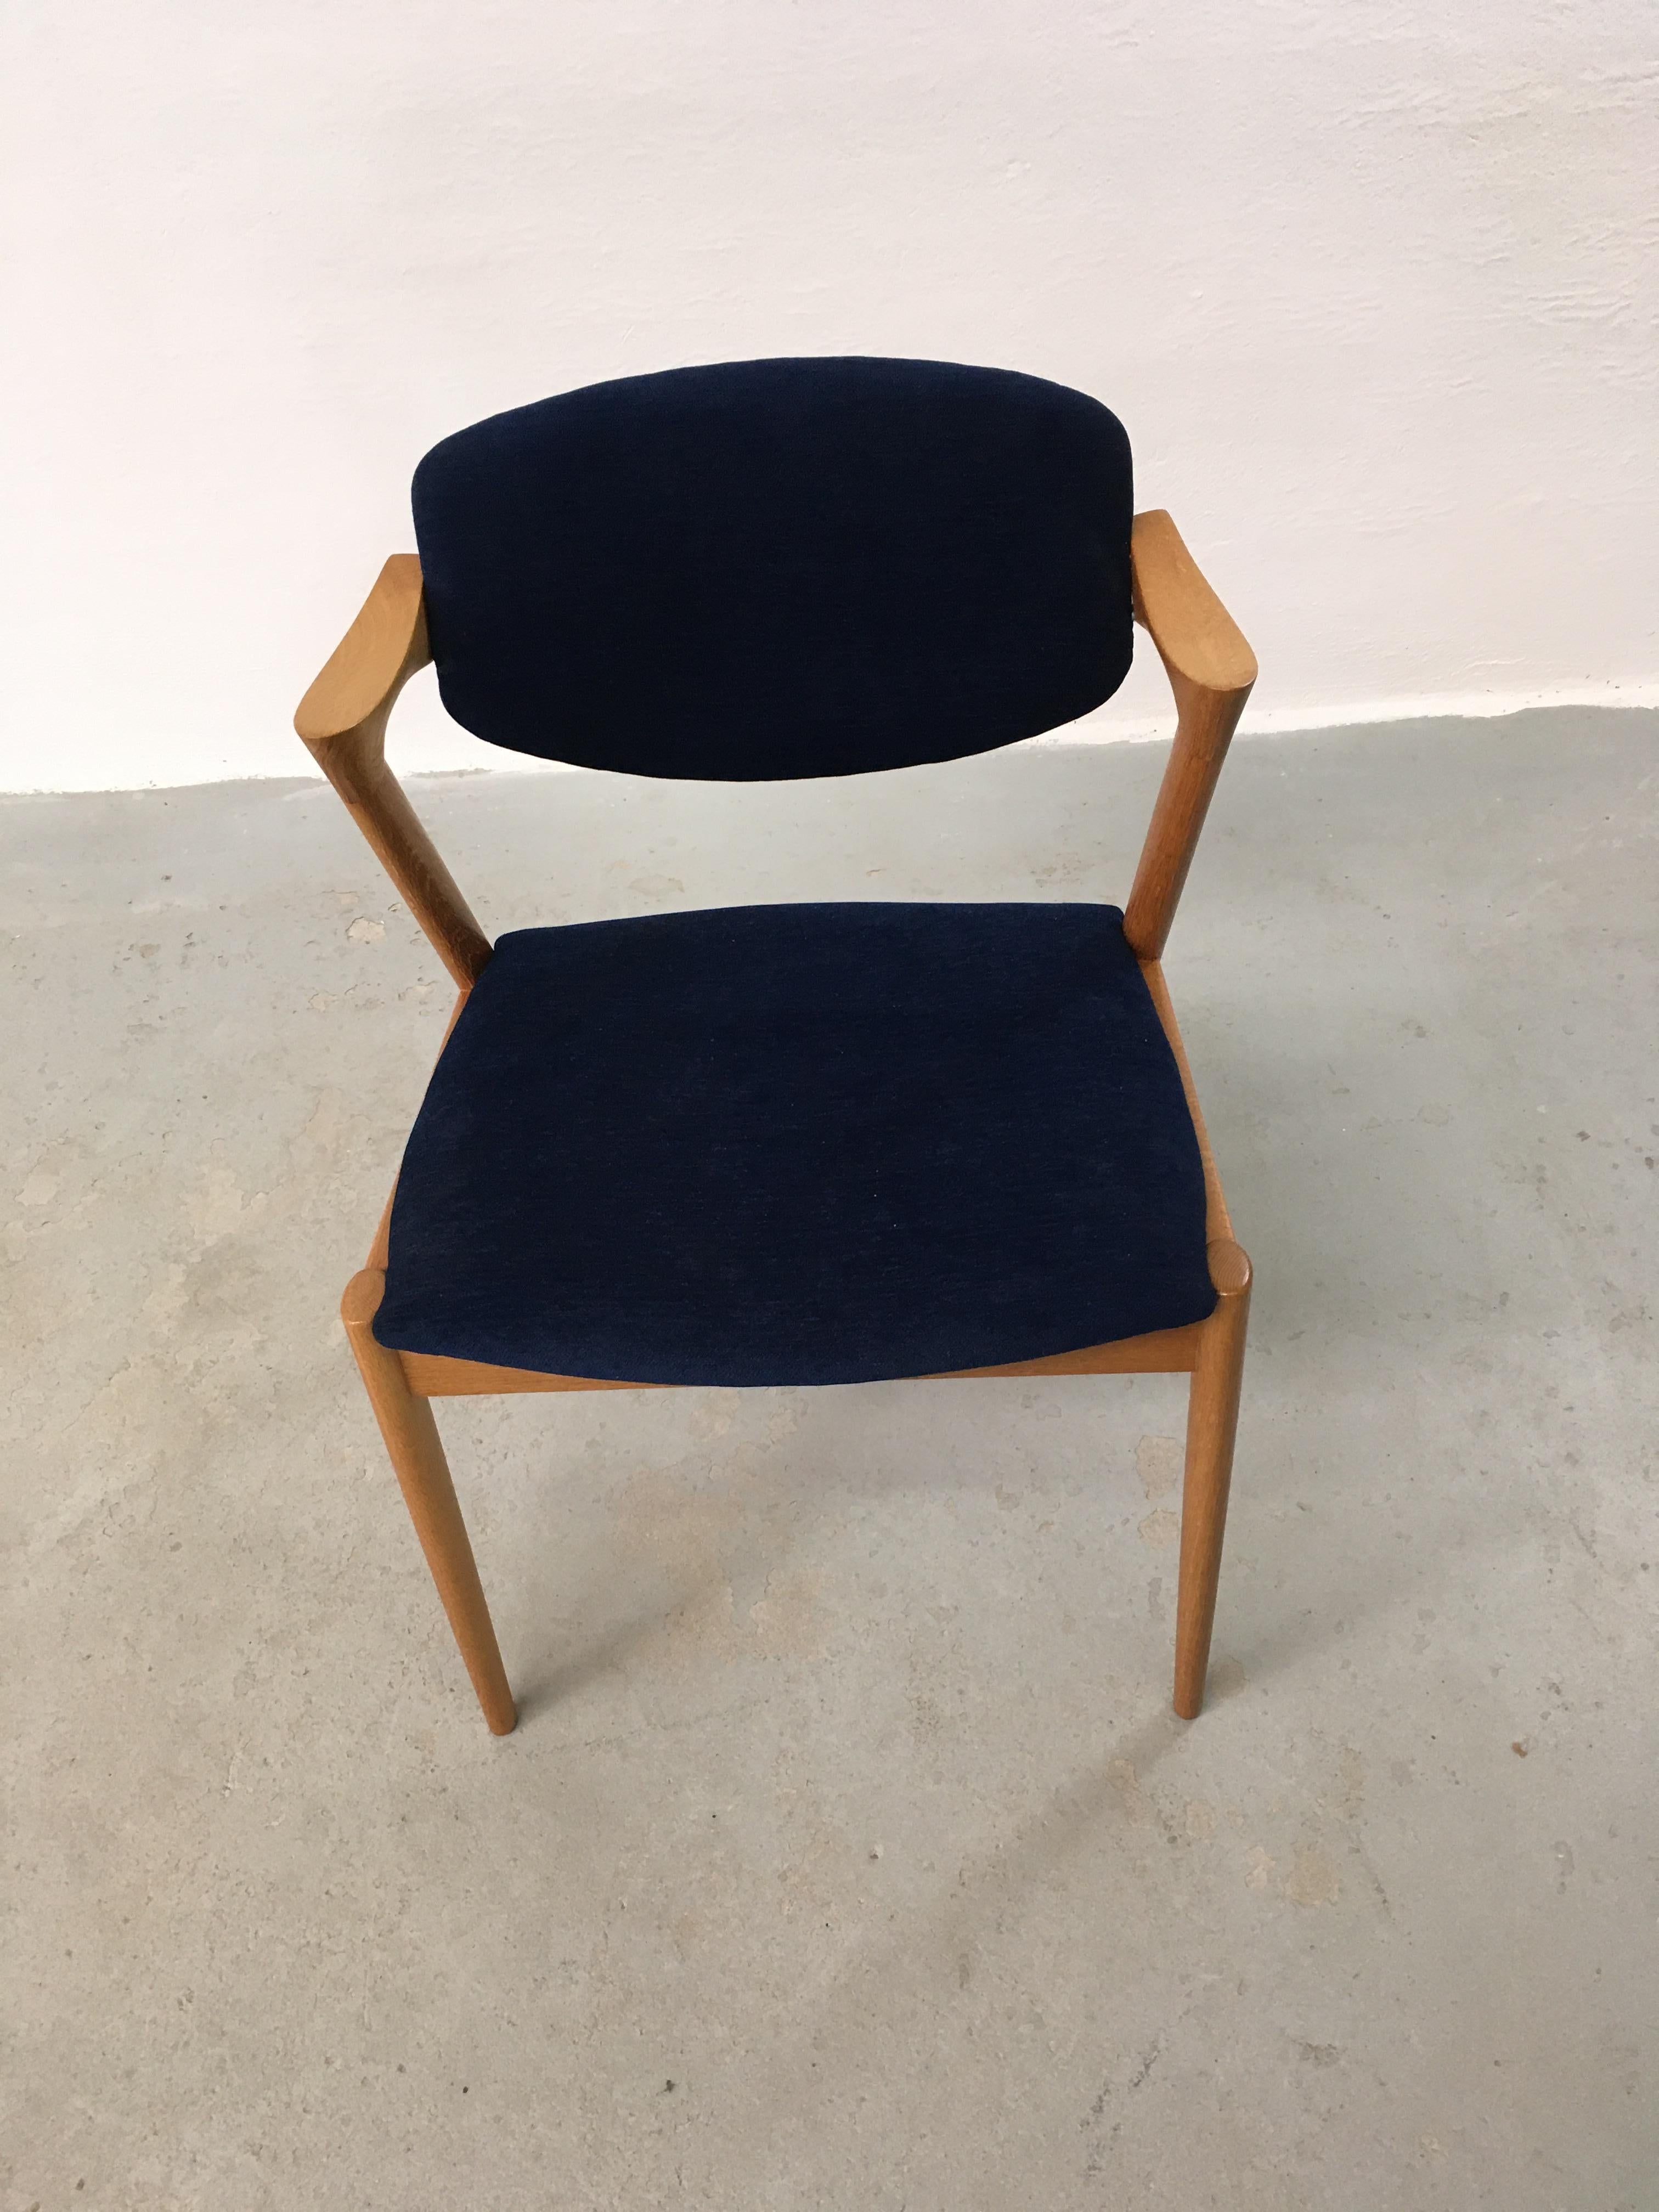 Set of six restored and refinished dining chairs in oak with adjustable backrest by Kai Kristiansen for Schous Møbelfabrik.

The chairs have Kai Kristiansens typical light and elegant design that make them fit in easily where you want them in your